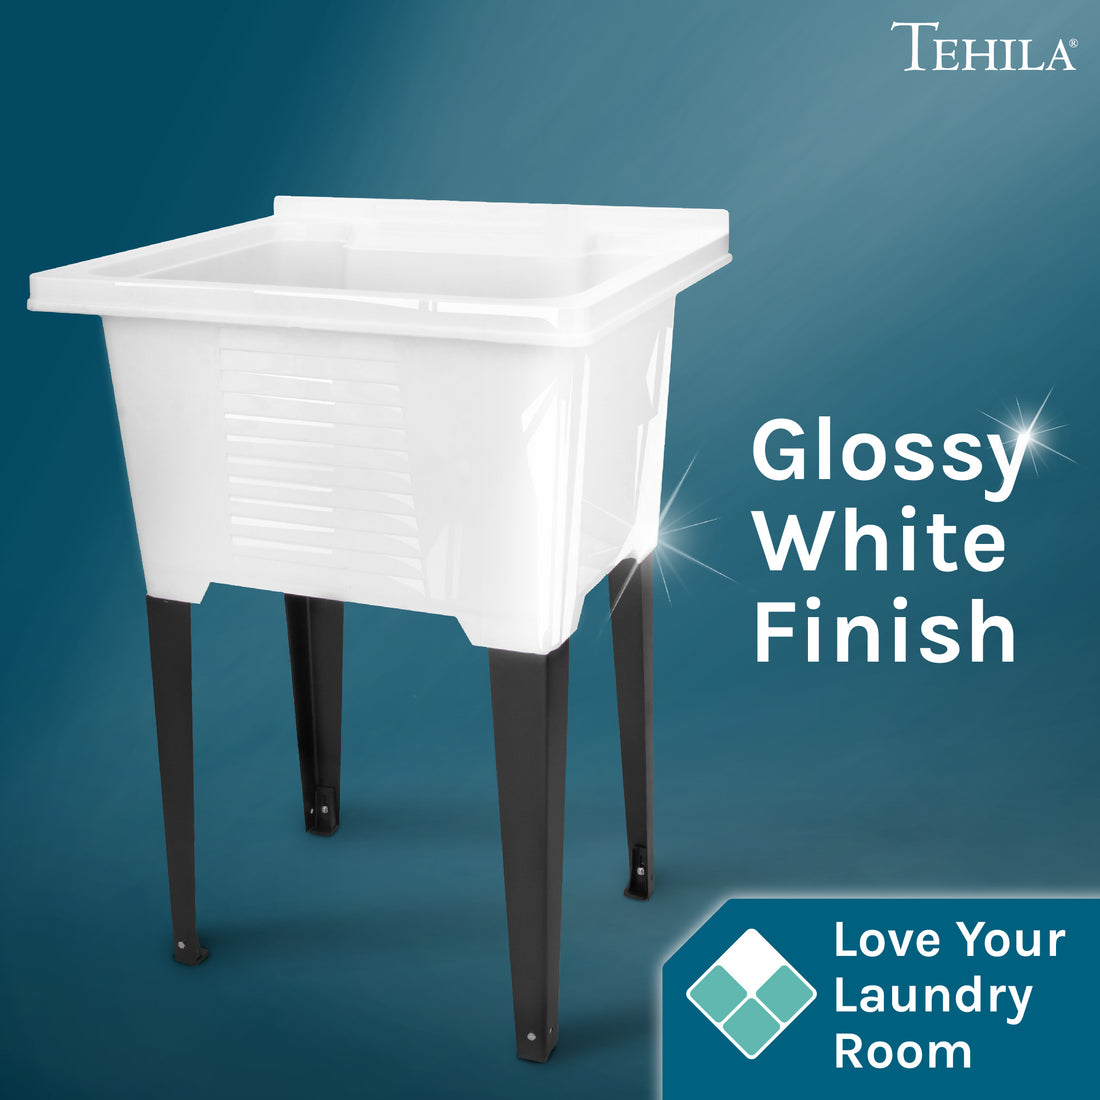 Glossy White Finish Love Your Laundry Room